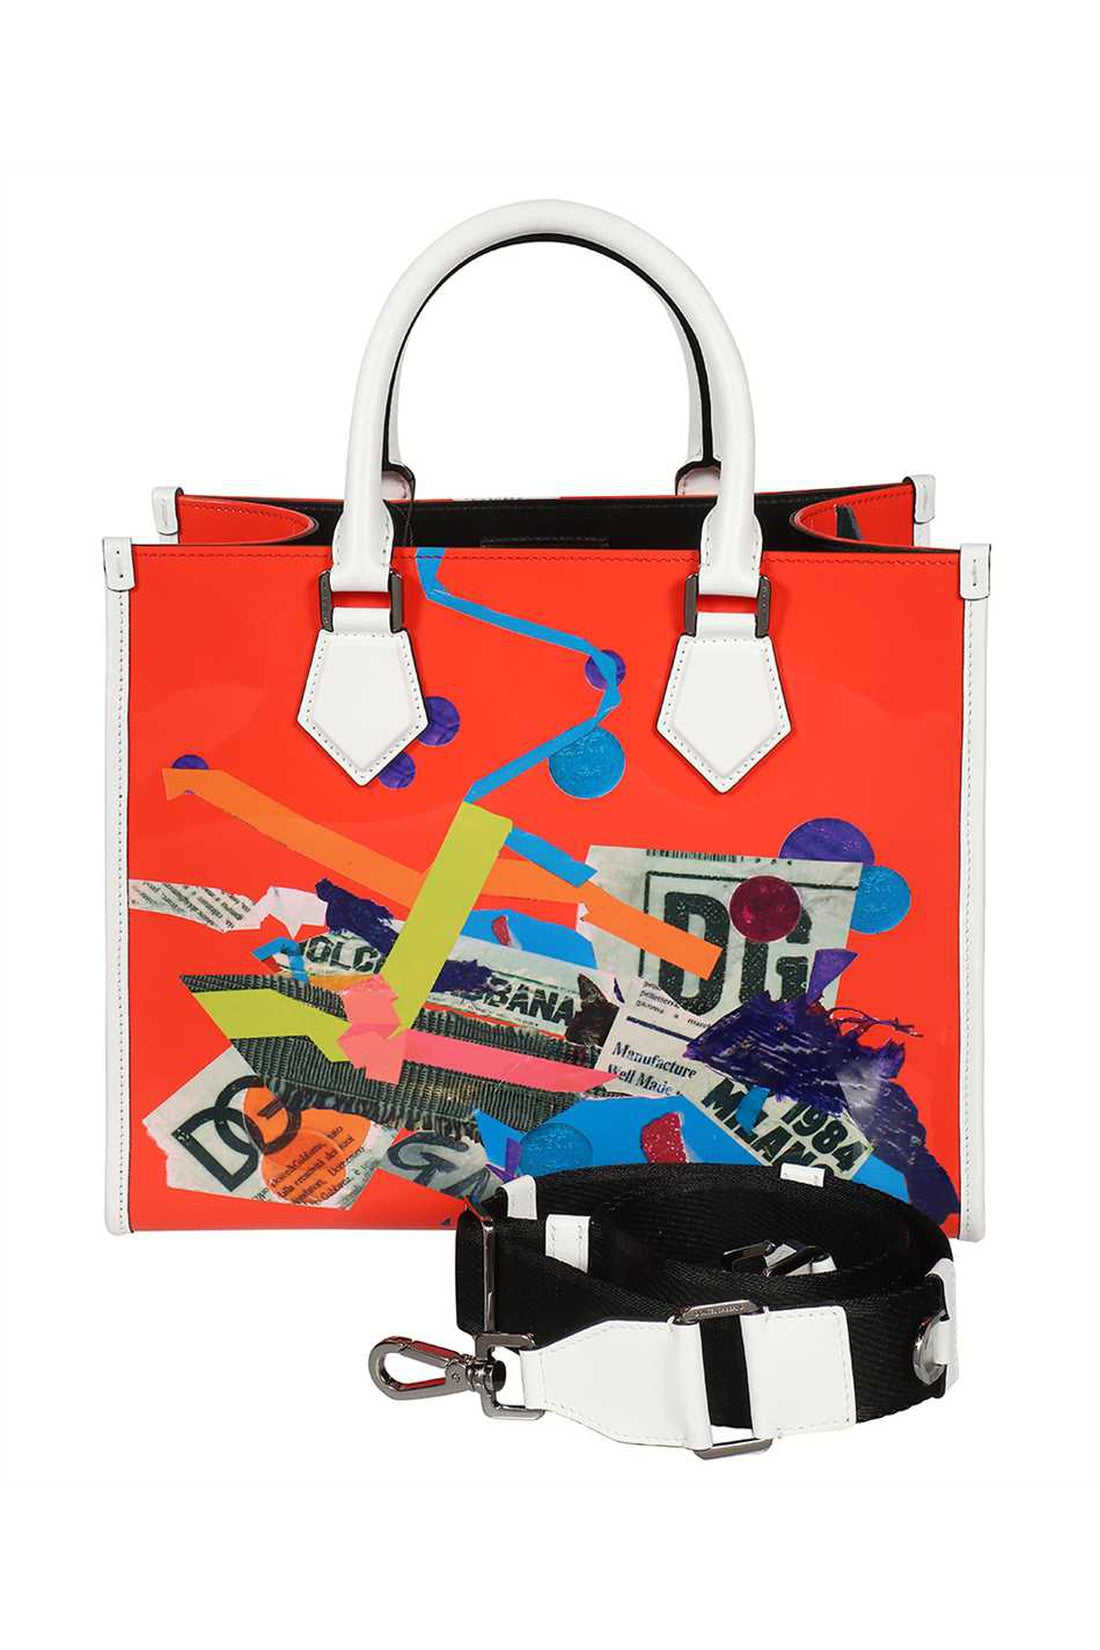 Dolce & Gabbana-OUTLET-SALE-Printed leather tote bag-ARCHIVIST